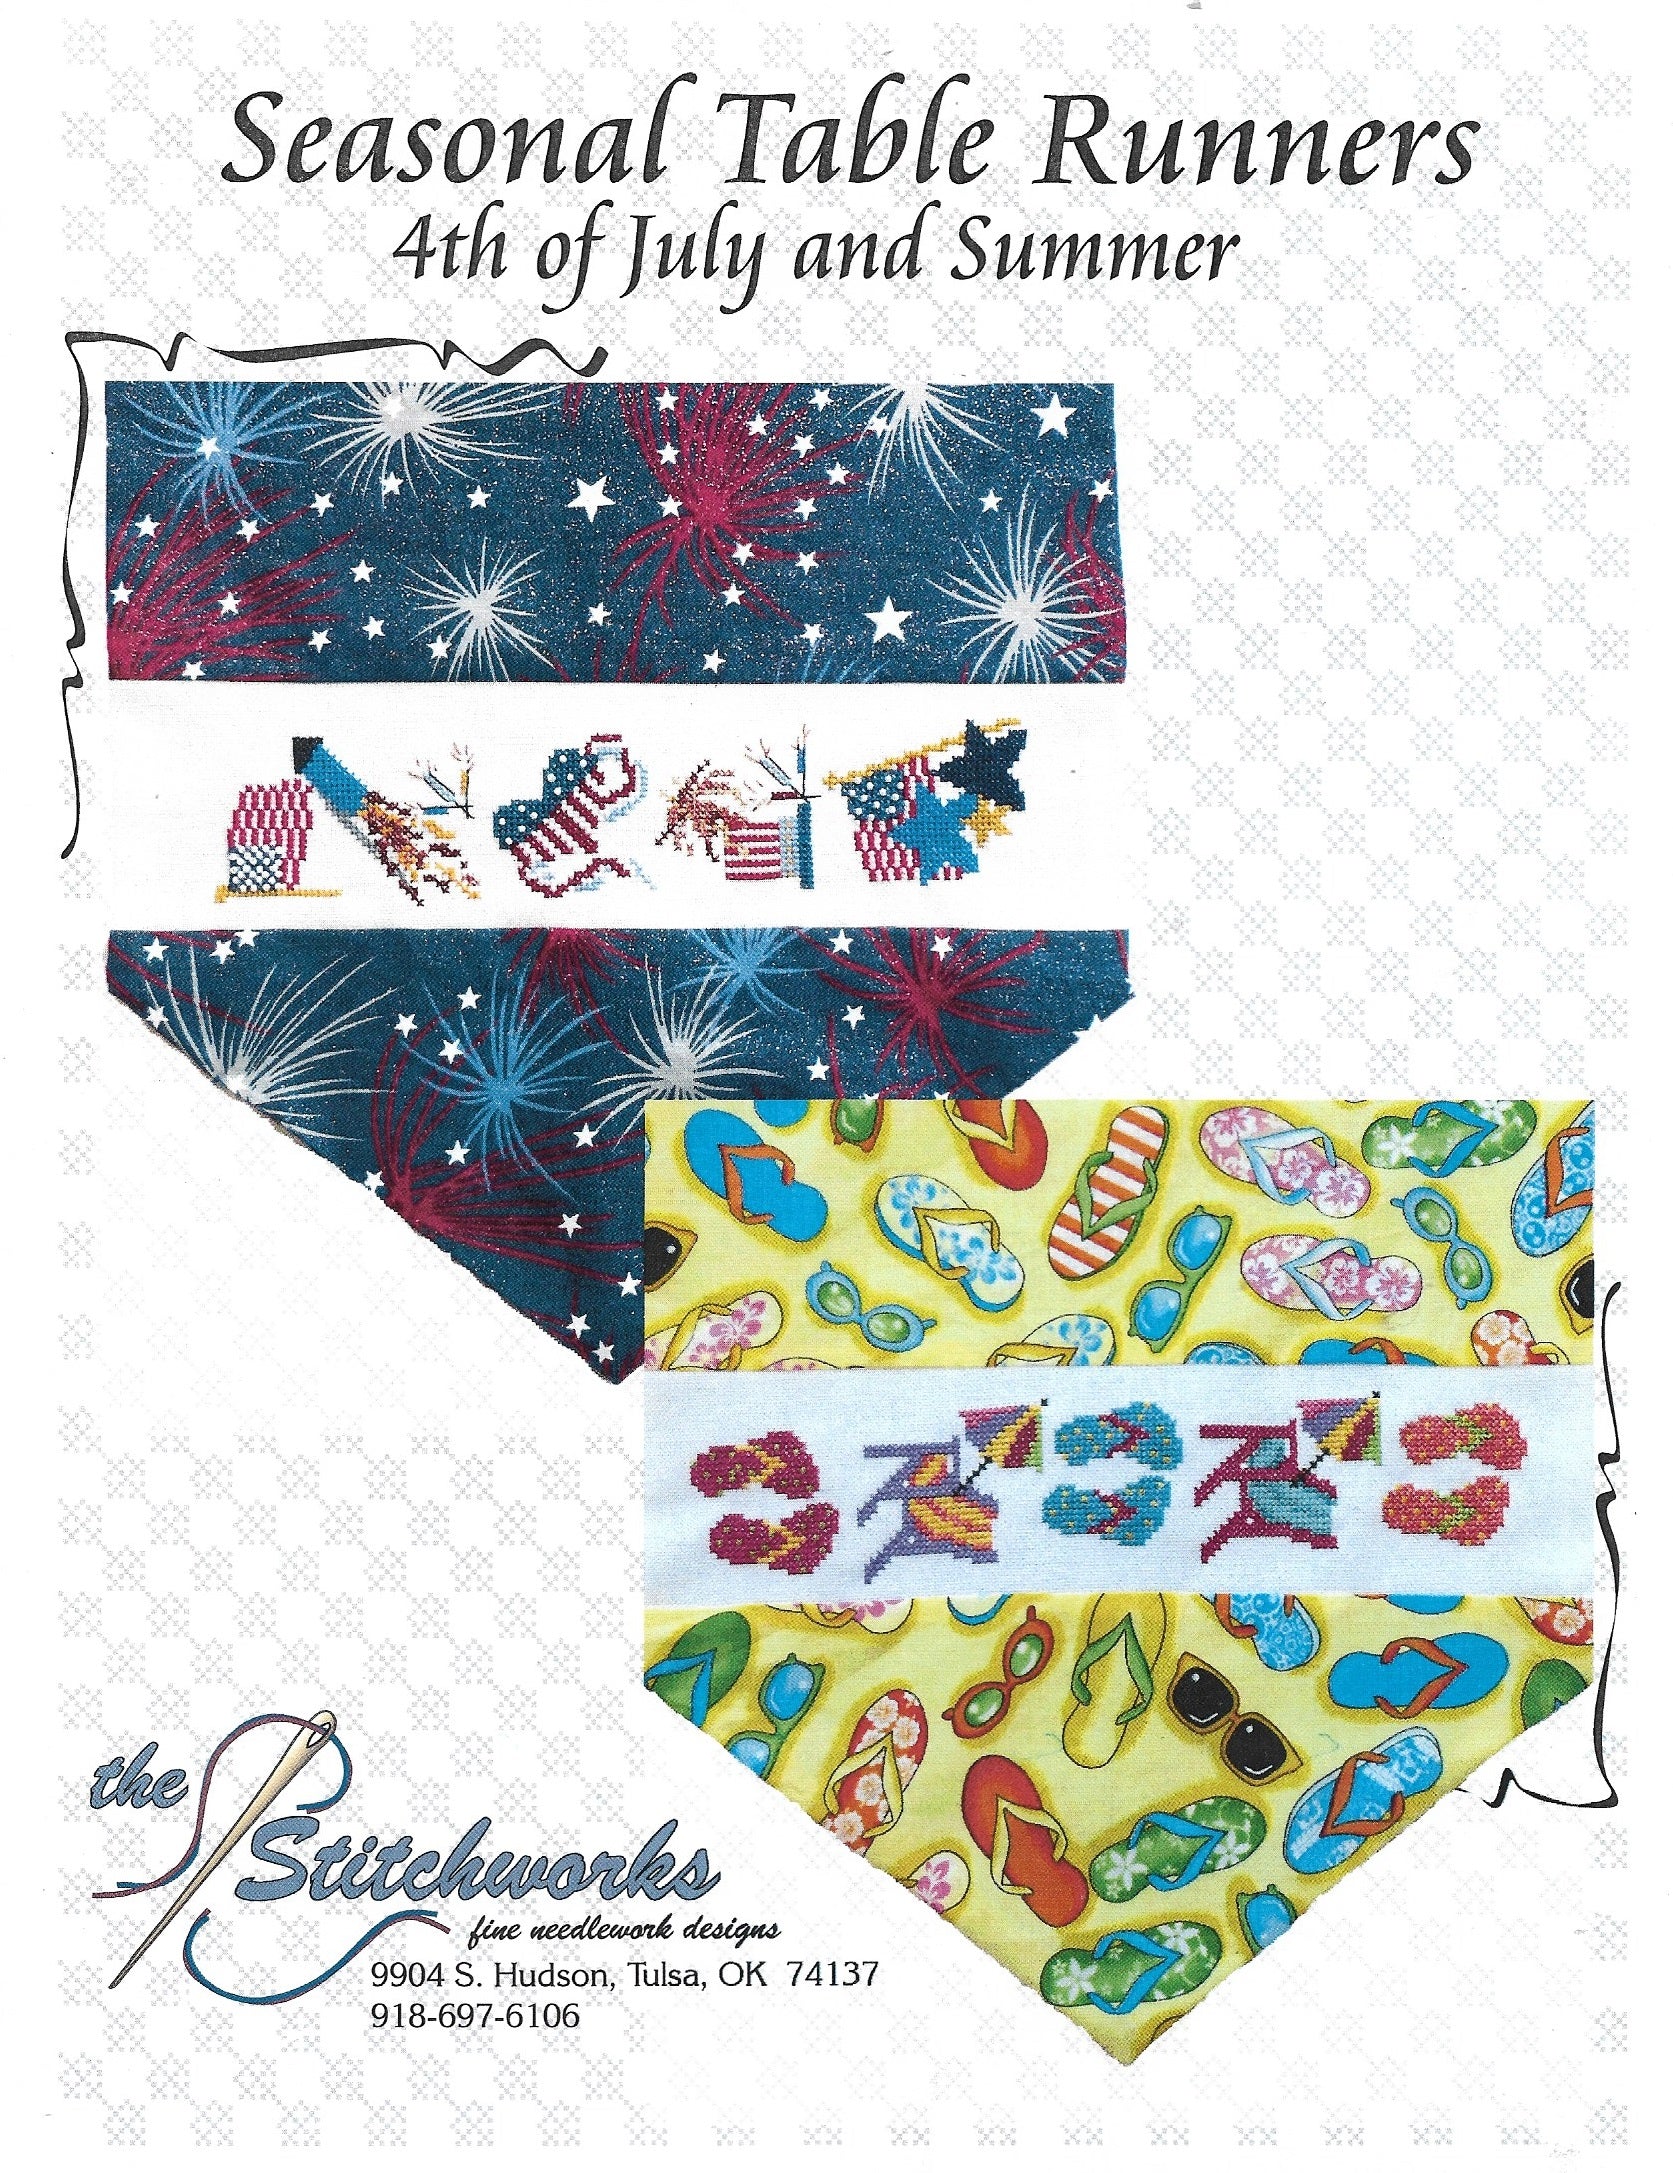 StitchWorks Seasonal Table Runner Designs (4th of July and Summer) cross stitch pattern